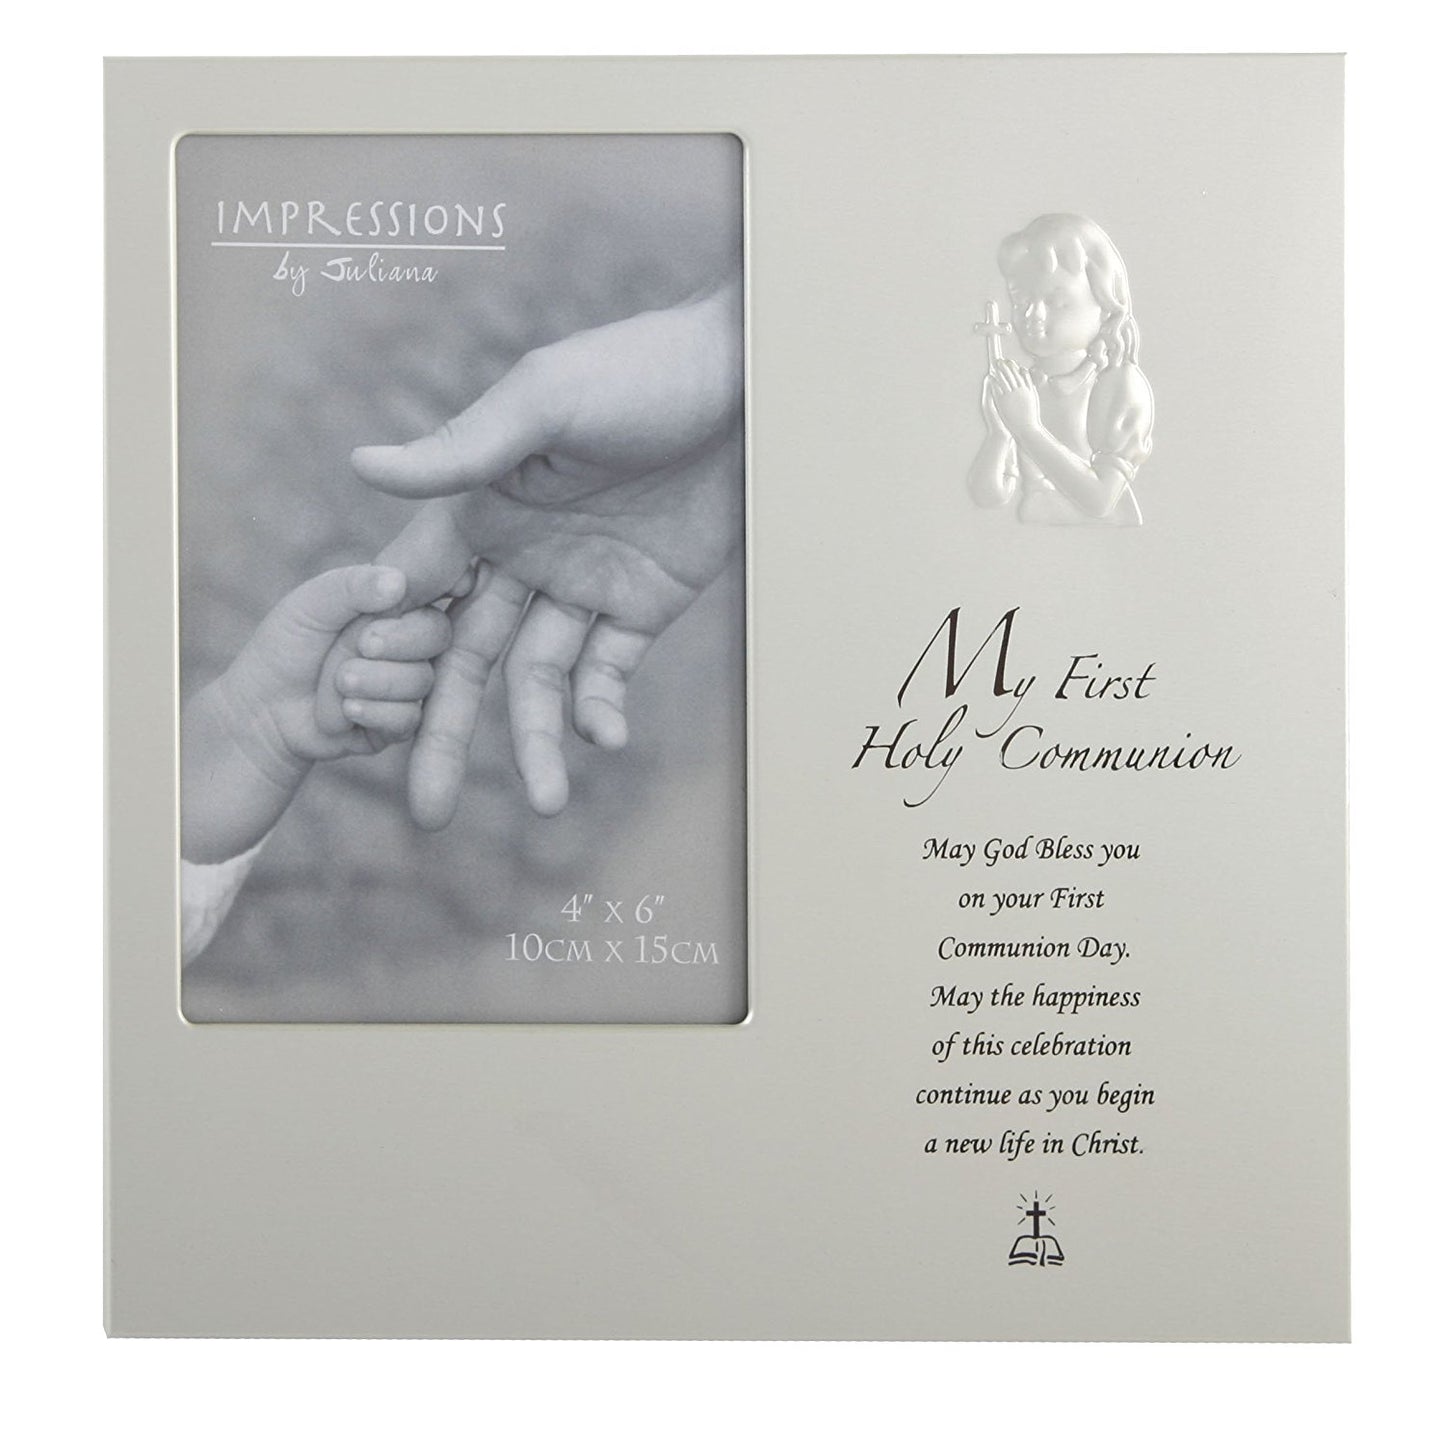 Impressions "My First Holy Communion" Silver Photo Frame with Verse GIRL - hanrattycraftsgifts.co.uk